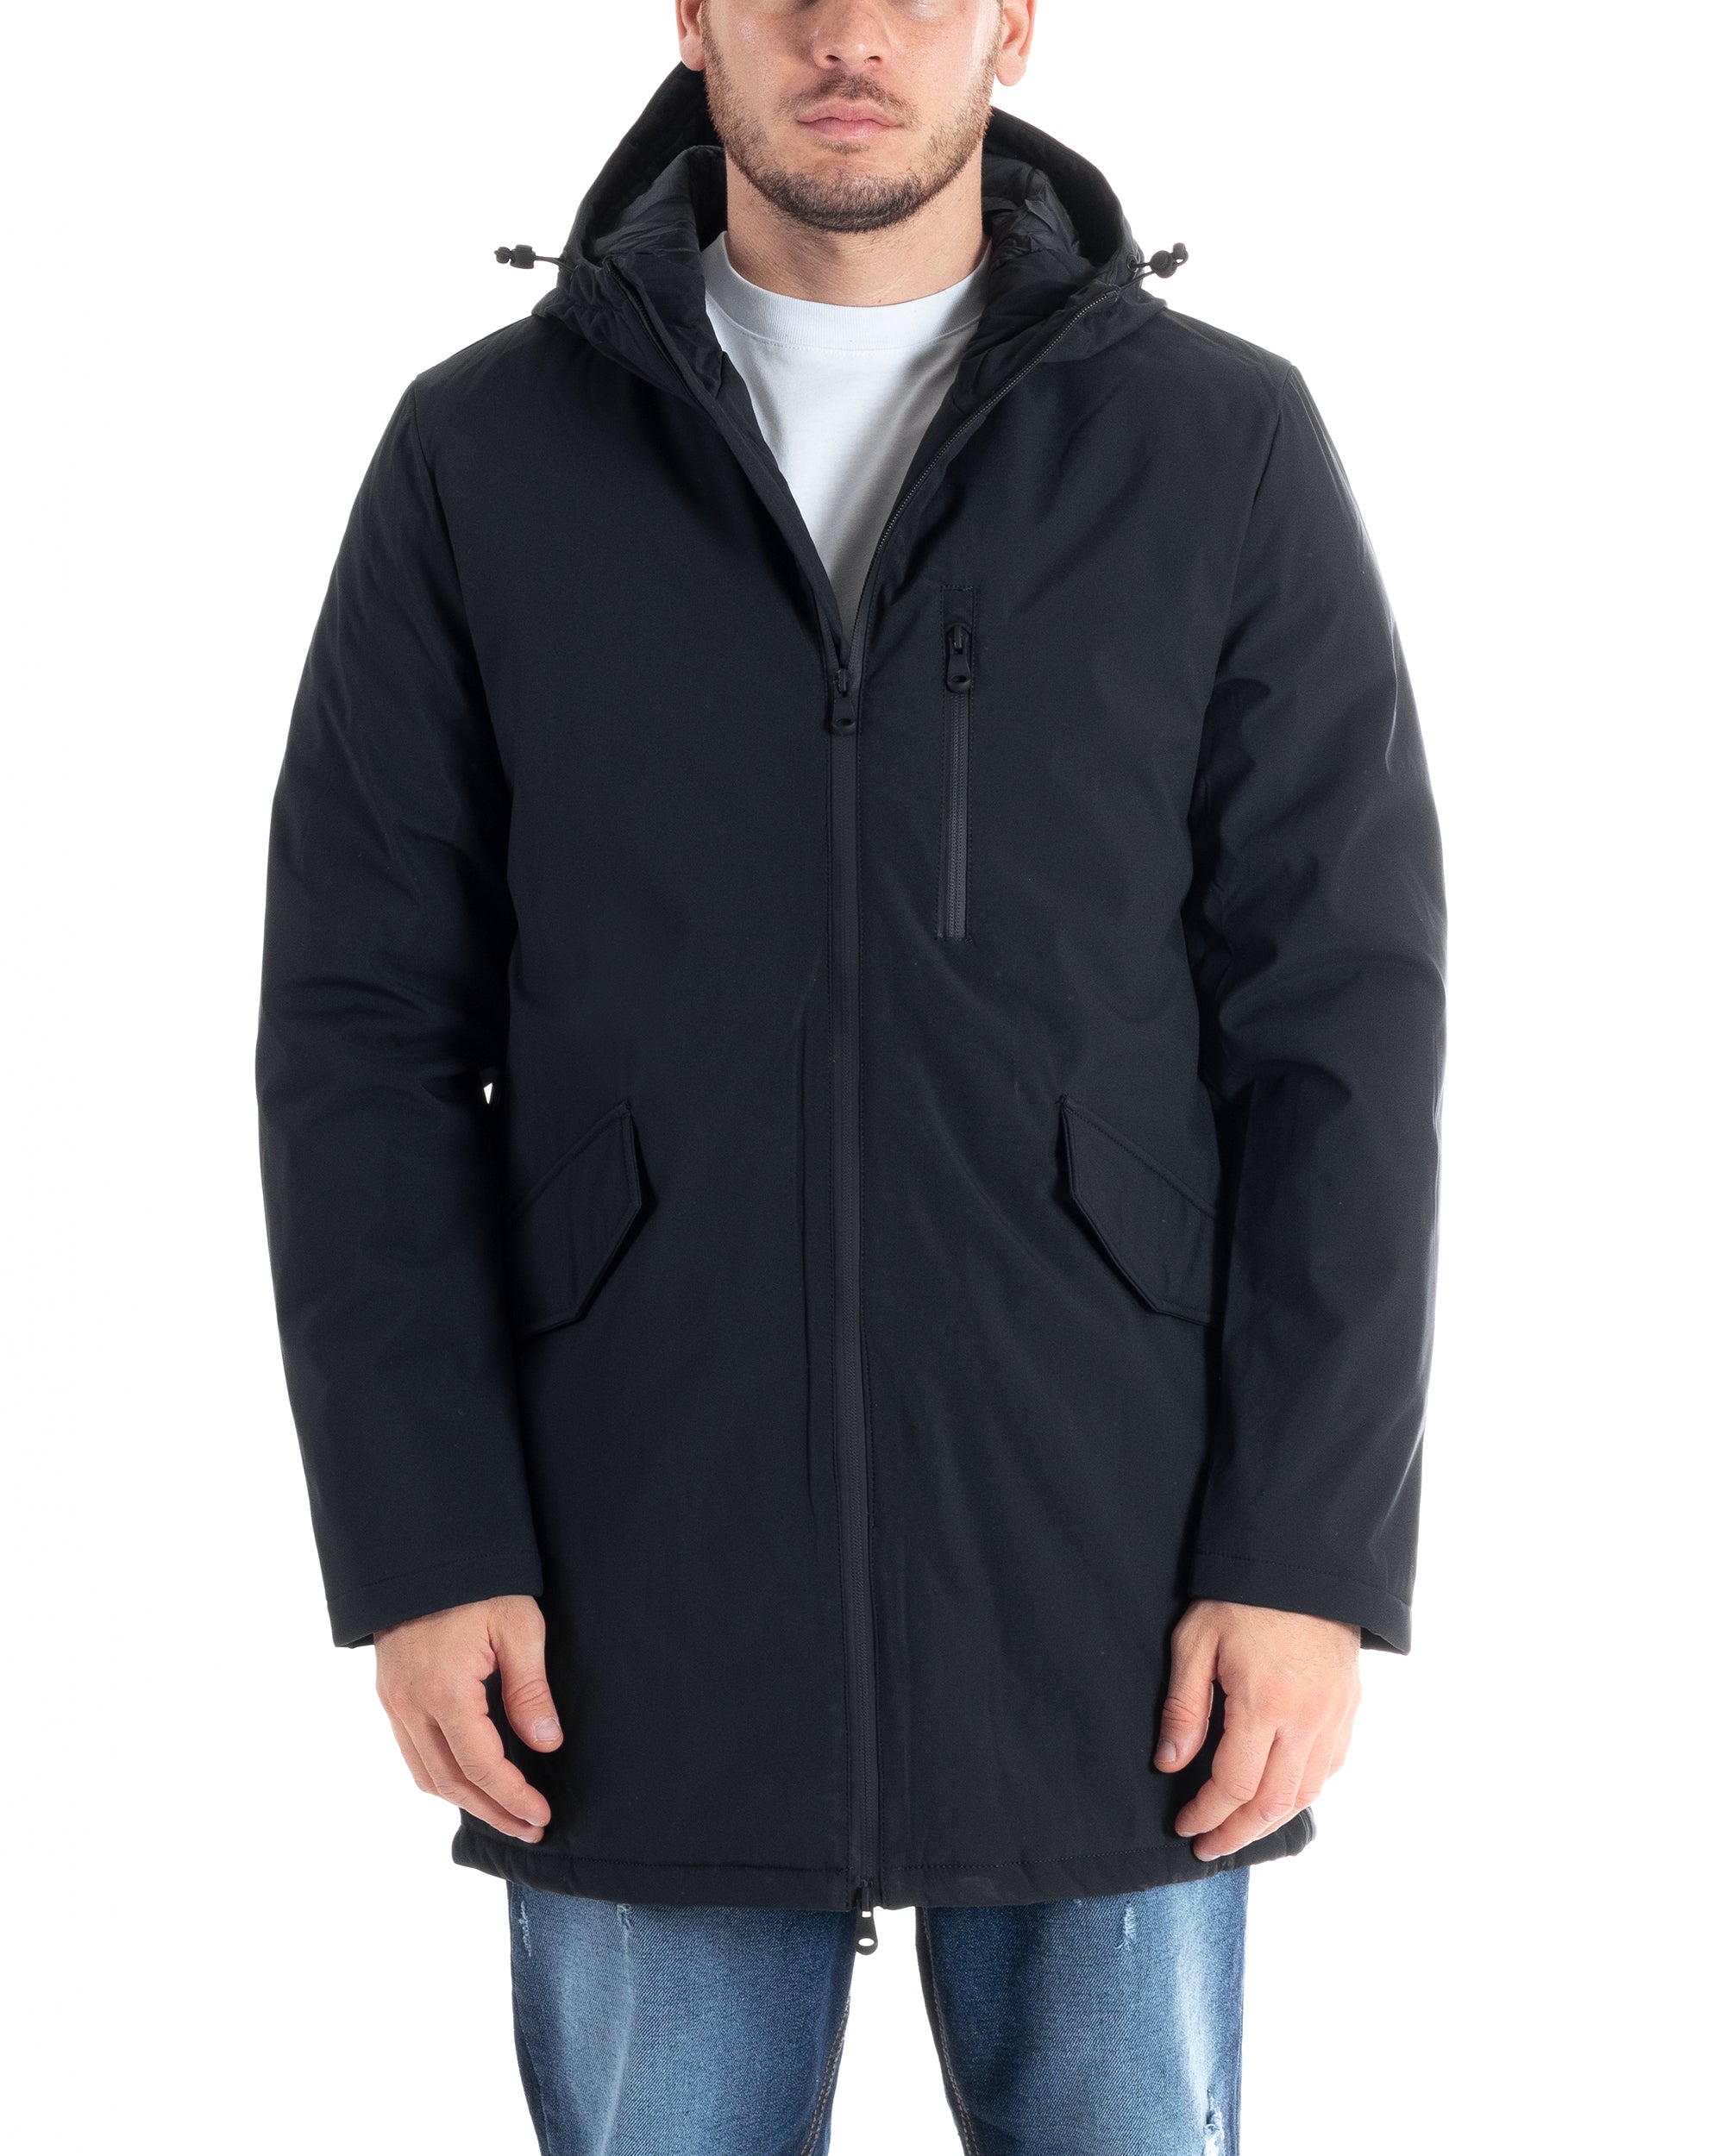 Men's Waterproof Trench Jacket Technical Fabric Long Padded Jacket With Hood Zipper Black GIOSAL-G3091A